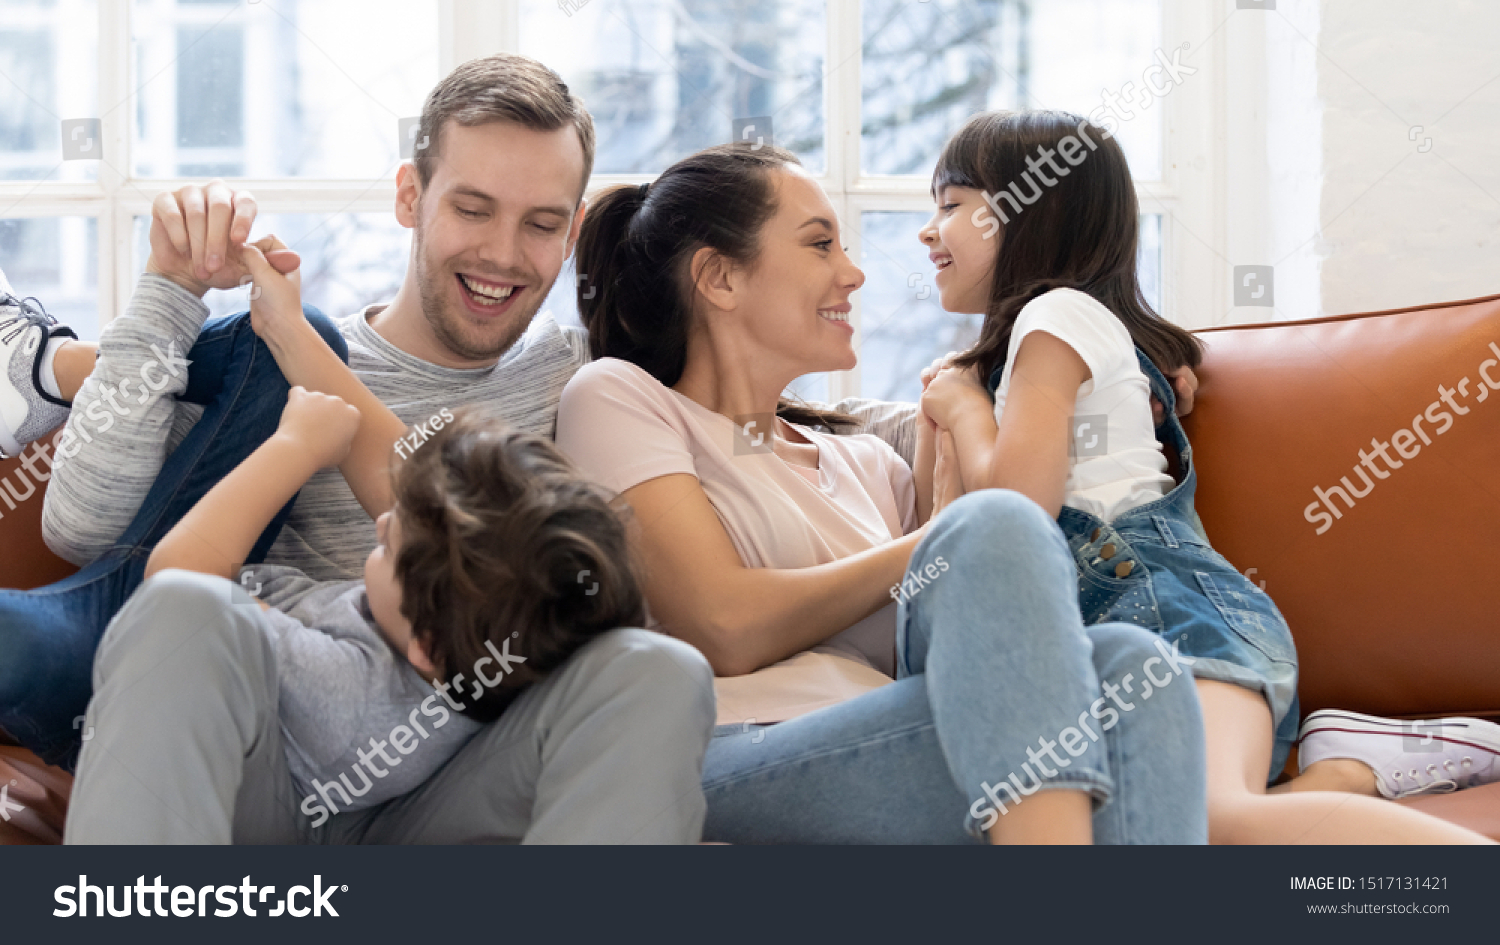 Cheerful family enjoying leisure weekend time together at home. Happy parents mommy and daddy playing with joyful small daughter and son, tickling each other, having fun on couch in living room. #1517131421